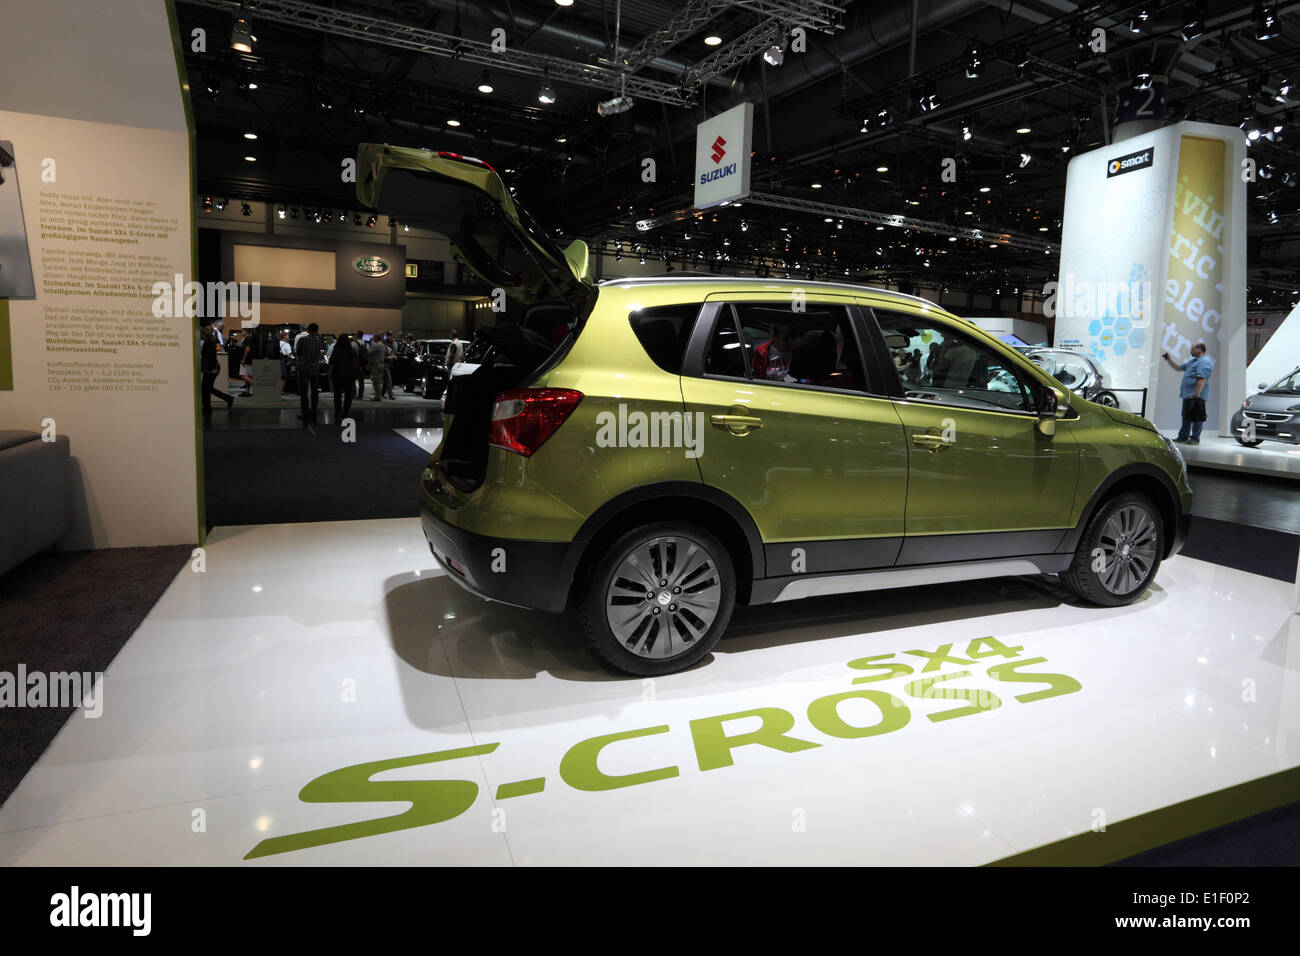 New Suzuki SX4 S-Cross at the AMI - Auto Mobile International Trade Fair on June 1st, 2014 in Leipzig, Saxony, Germany Stock Photo